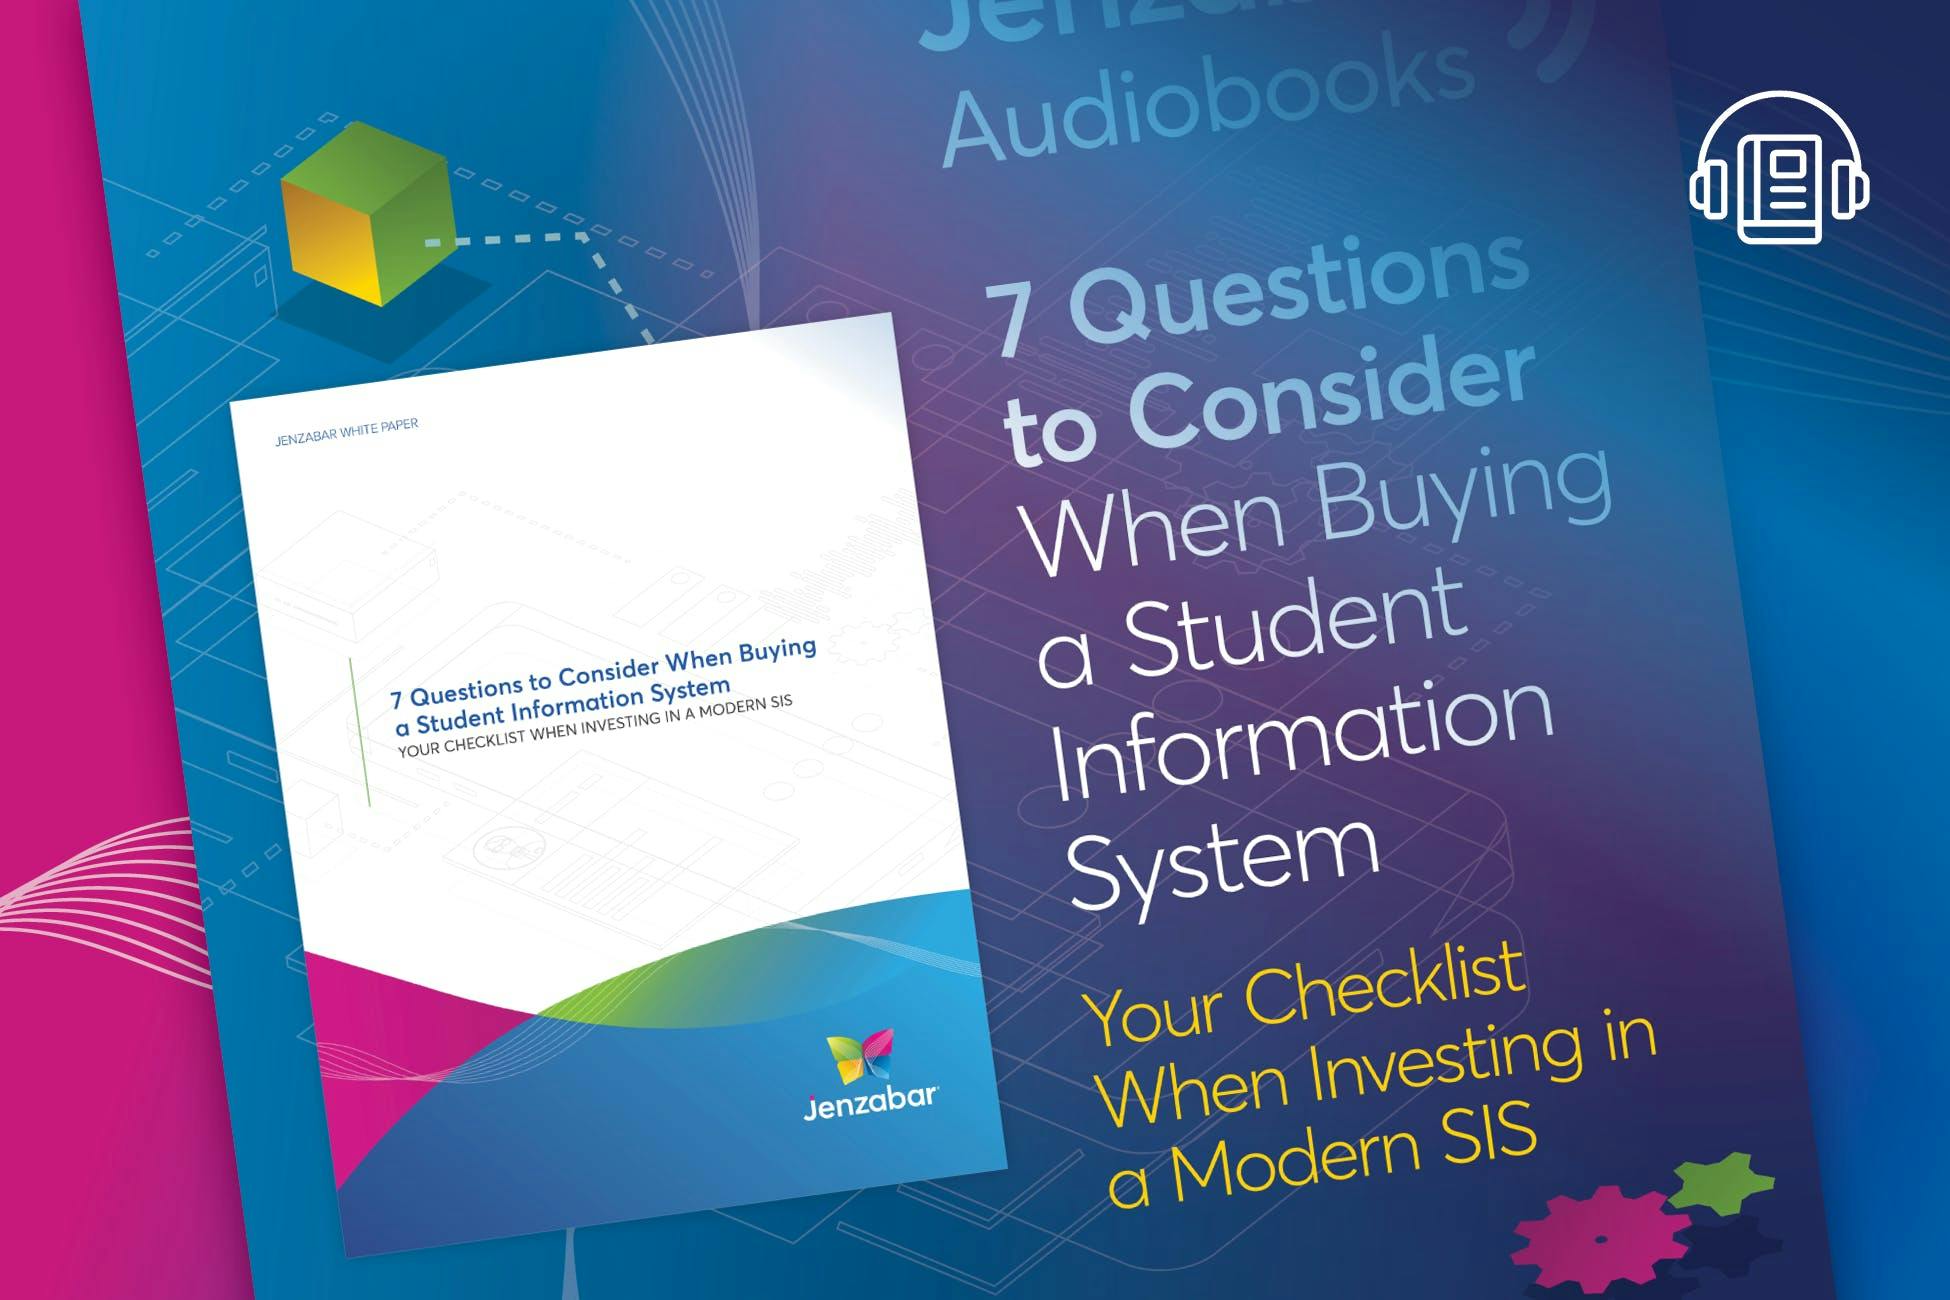 Audiobook: What 7 Questions Should You Ask When Buying a Student Information System 